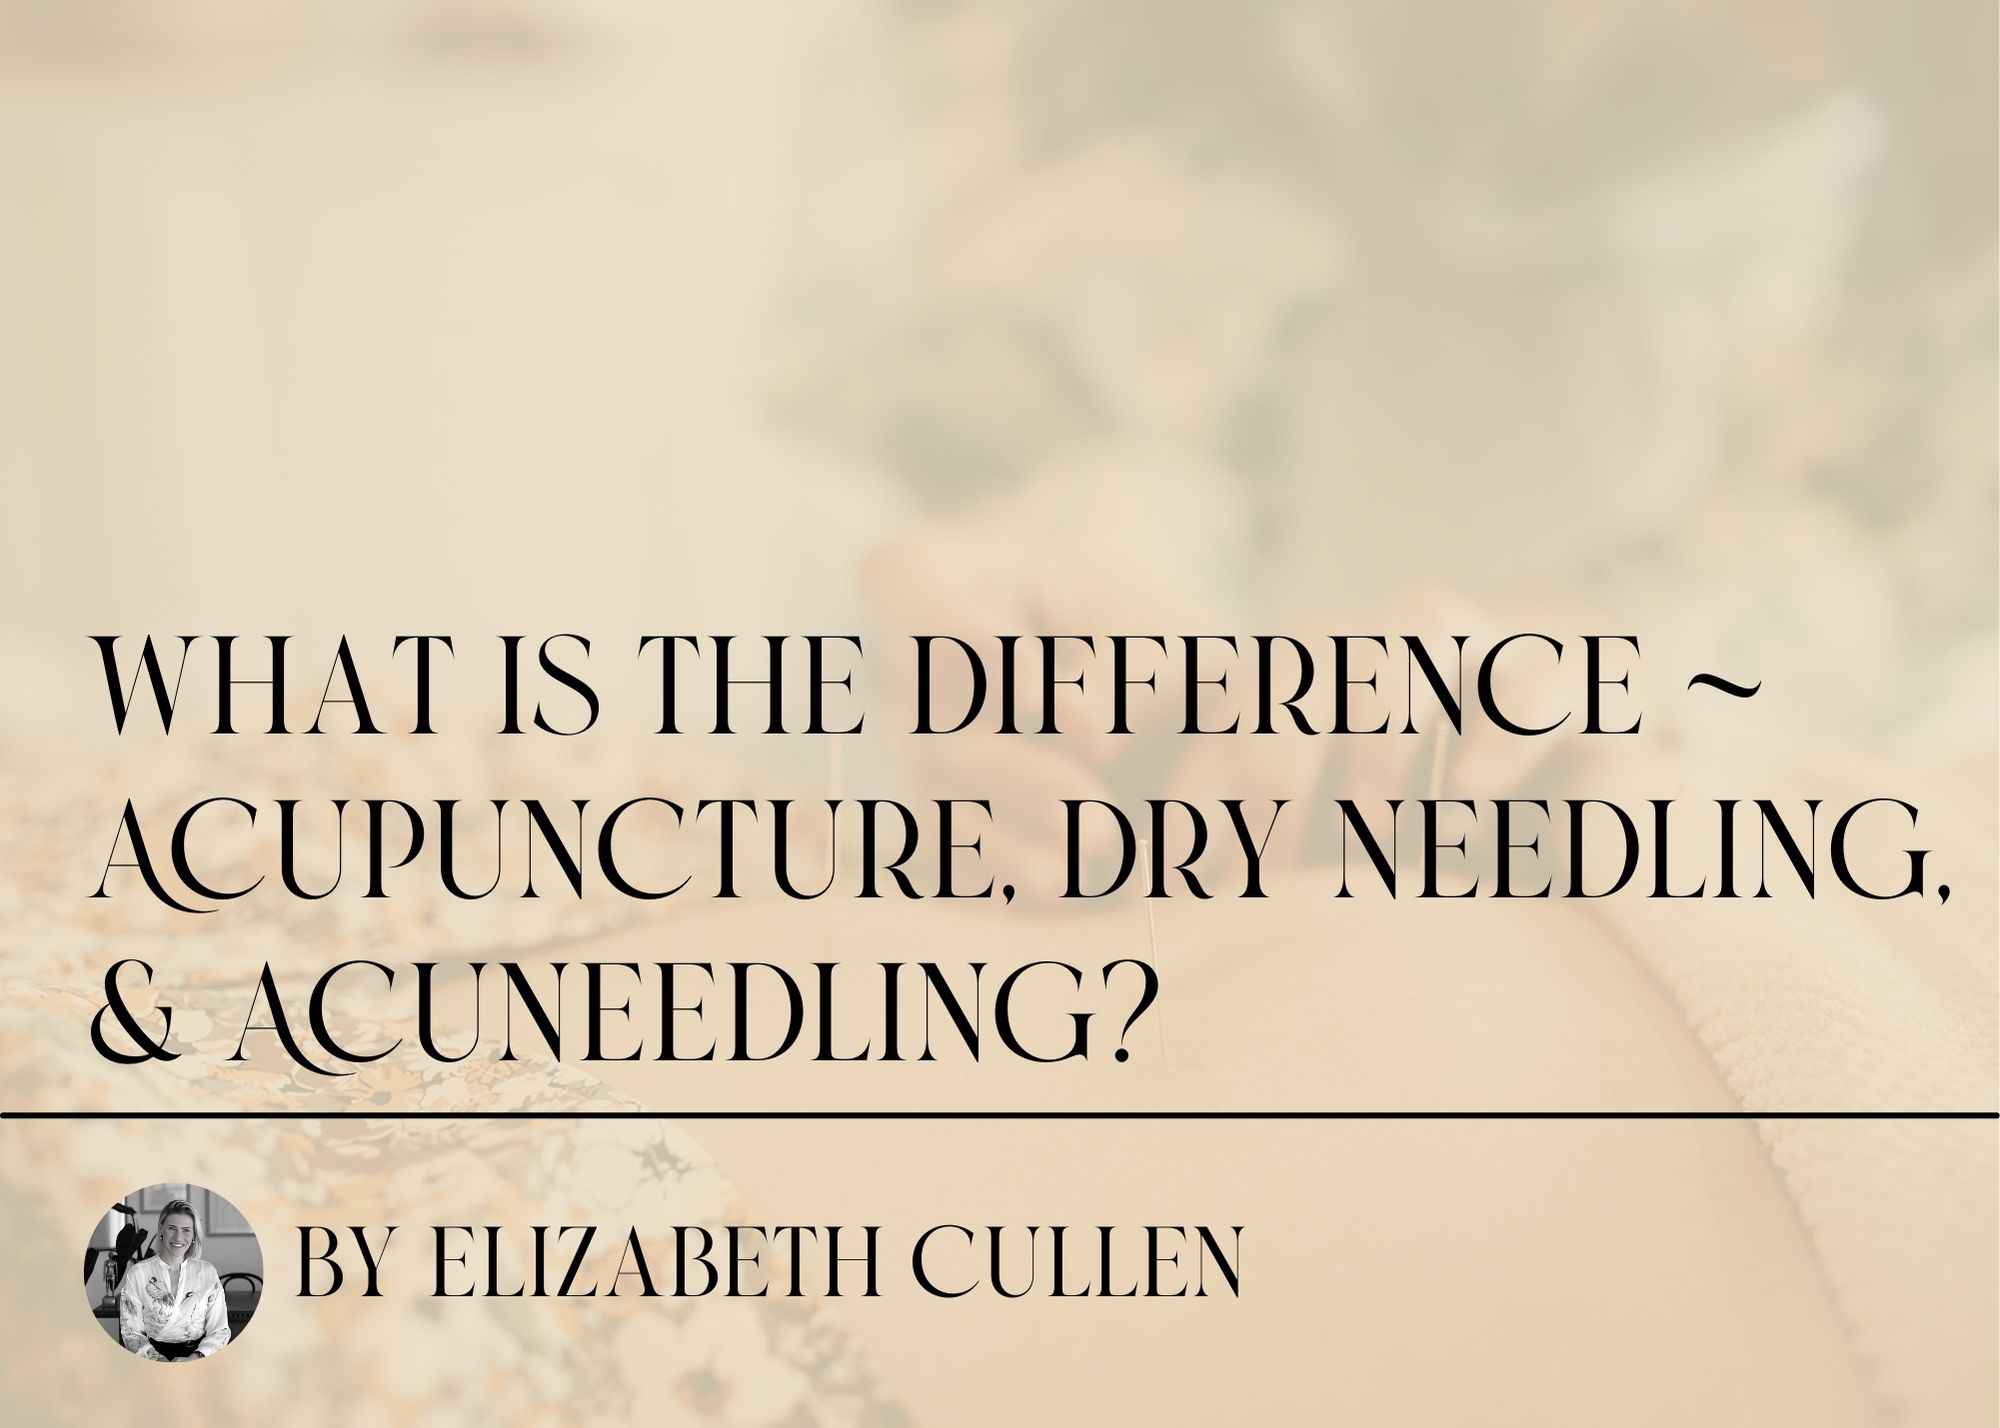 What is the difference between Acupuncture, Dry Needling, & Acuneedling?